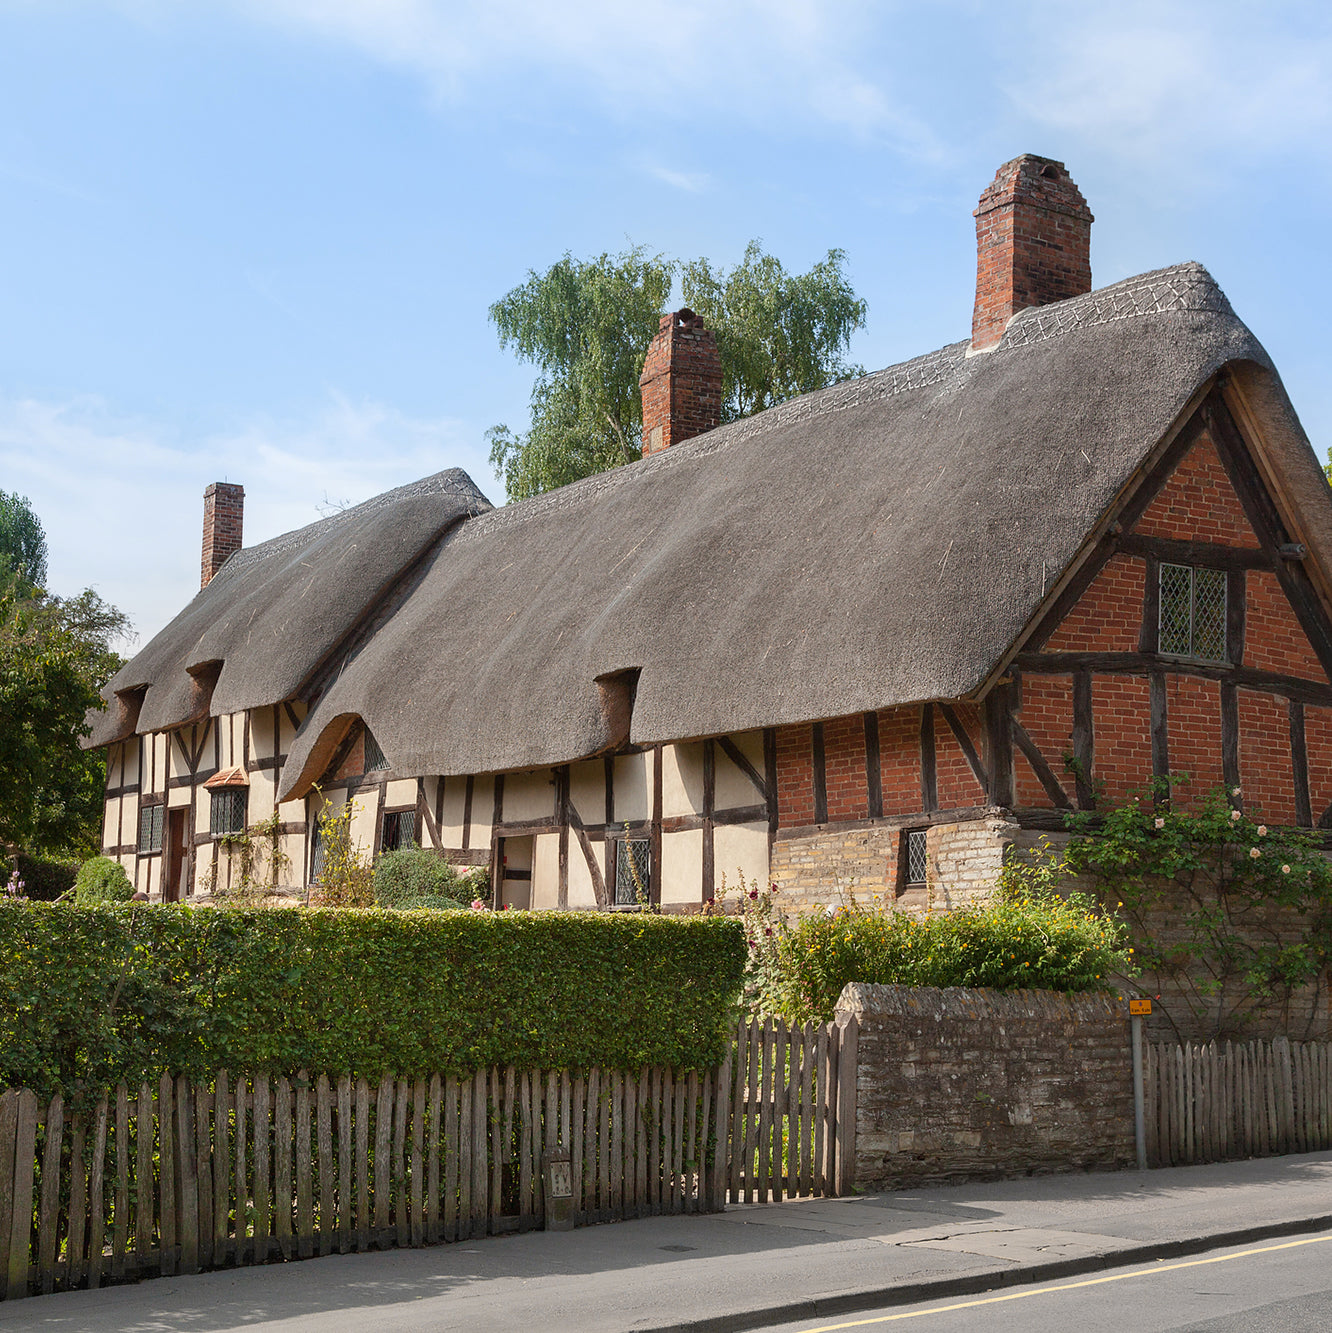 THATCHED HOUSE: A DREAM HOME OR A DEMANDING DWELLING?